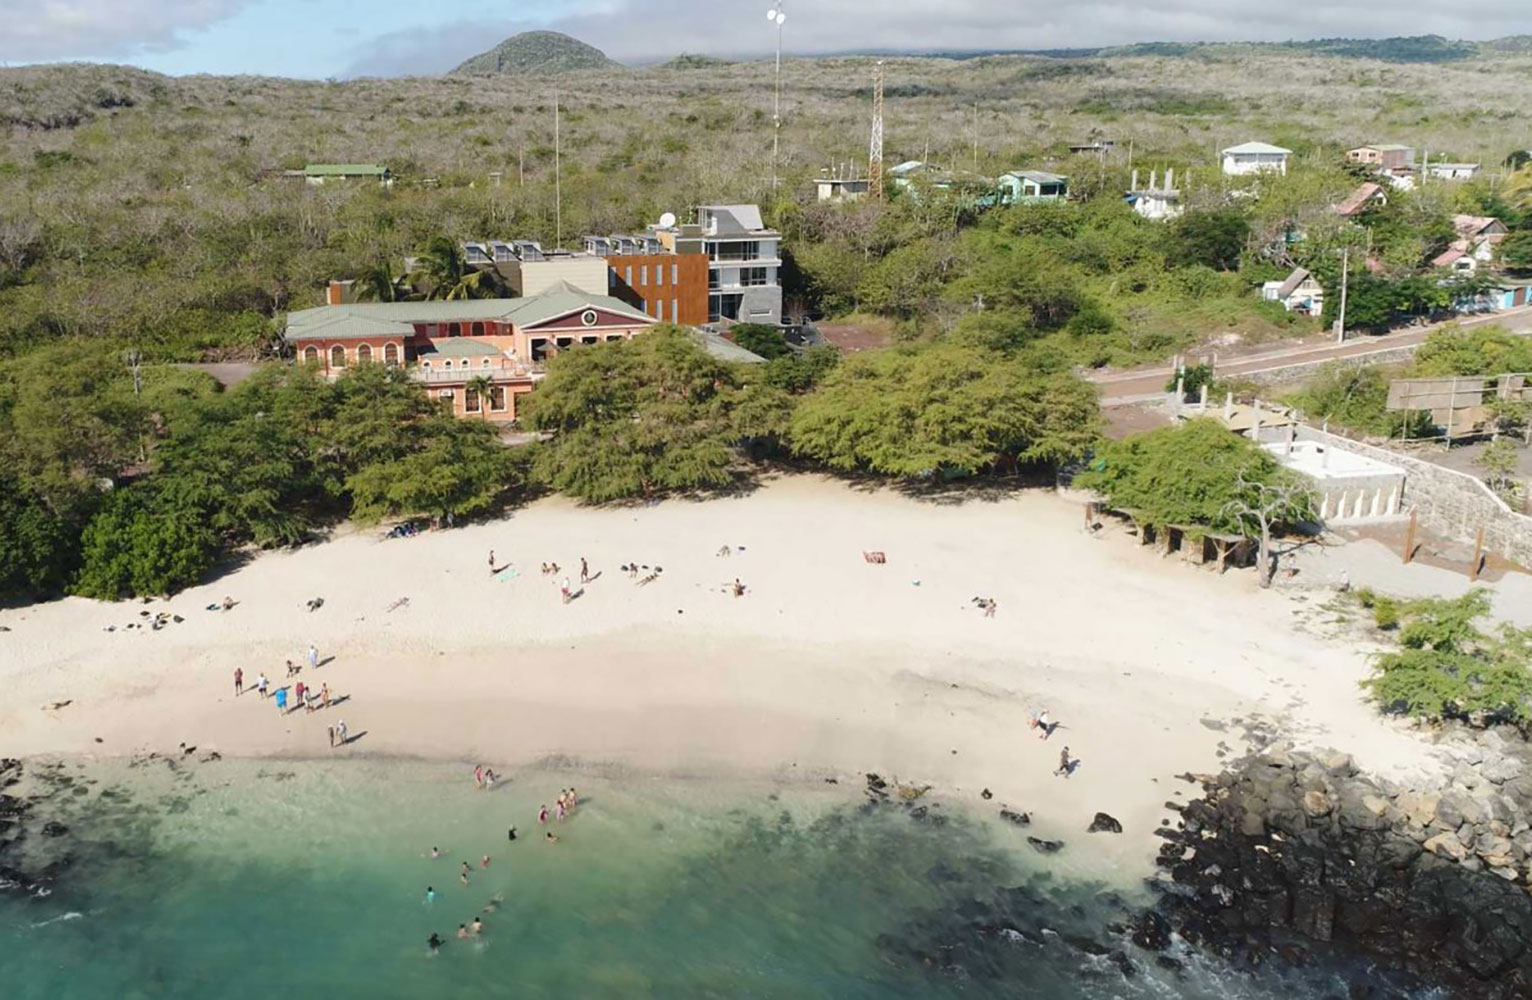 An aerial view of the Galapagos Science Center with beach and ocean in the foreground